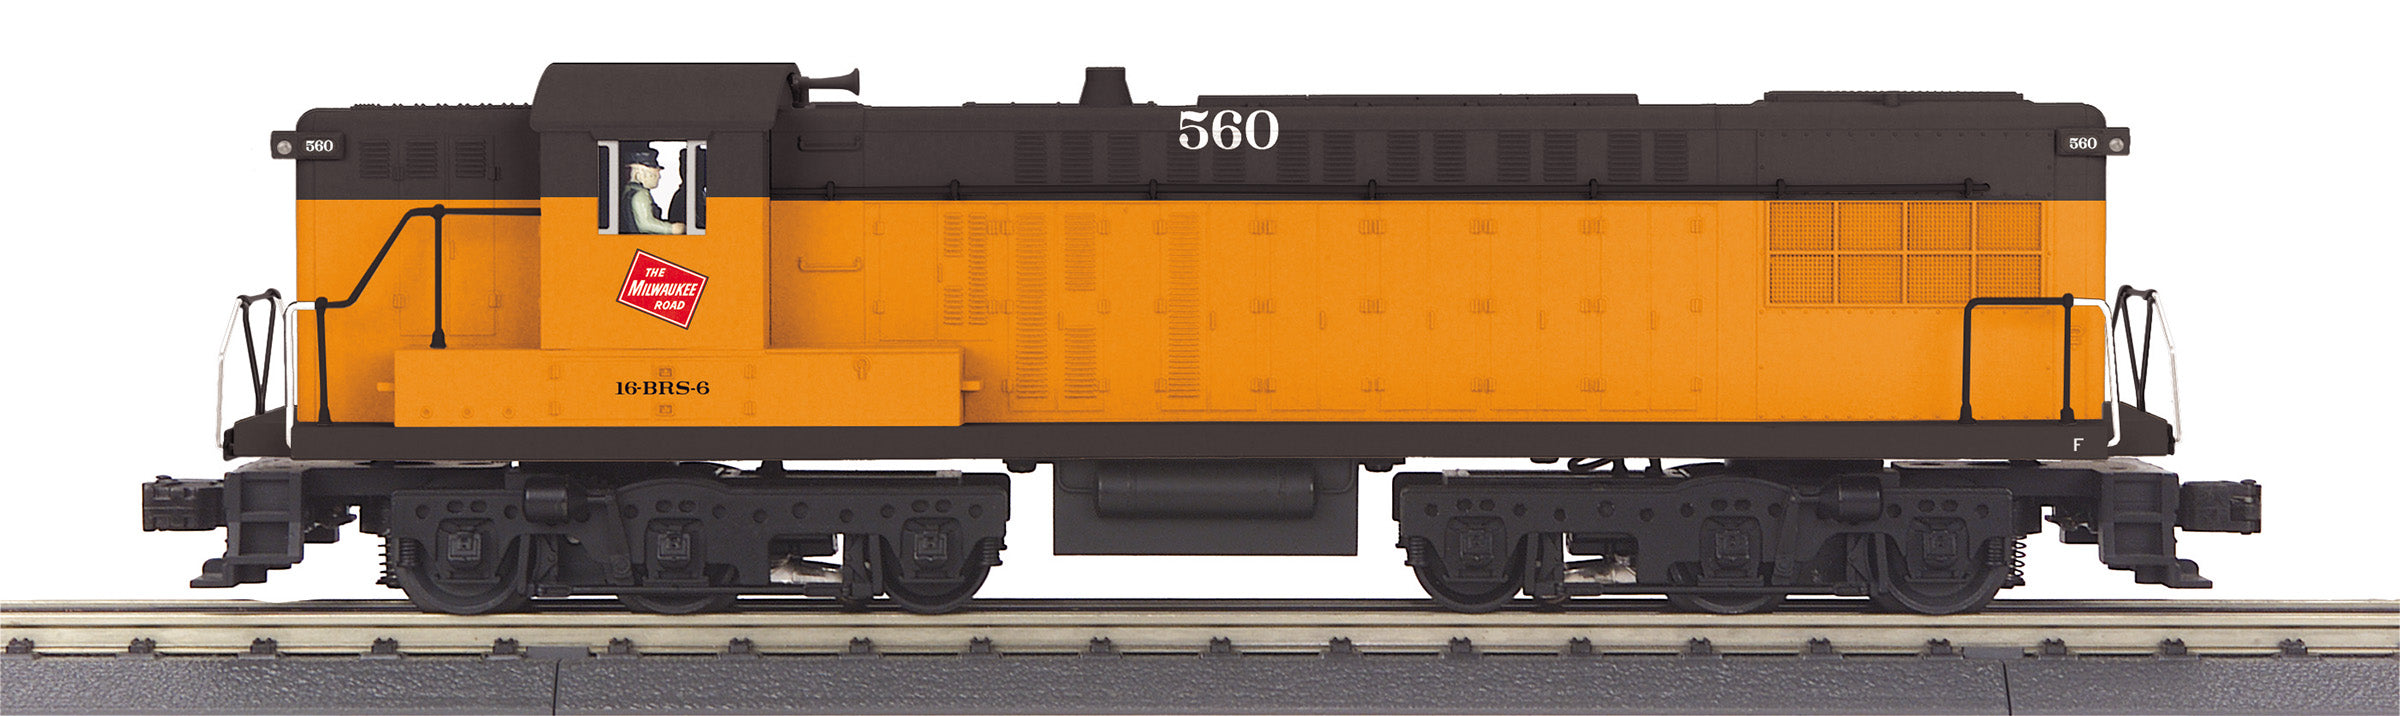 MTH 30-20889-1 - AS-616 Diesel Engine "Milwaukee Road" w/ PS3 #560 - Custom Run for MrMuffin'sTrains